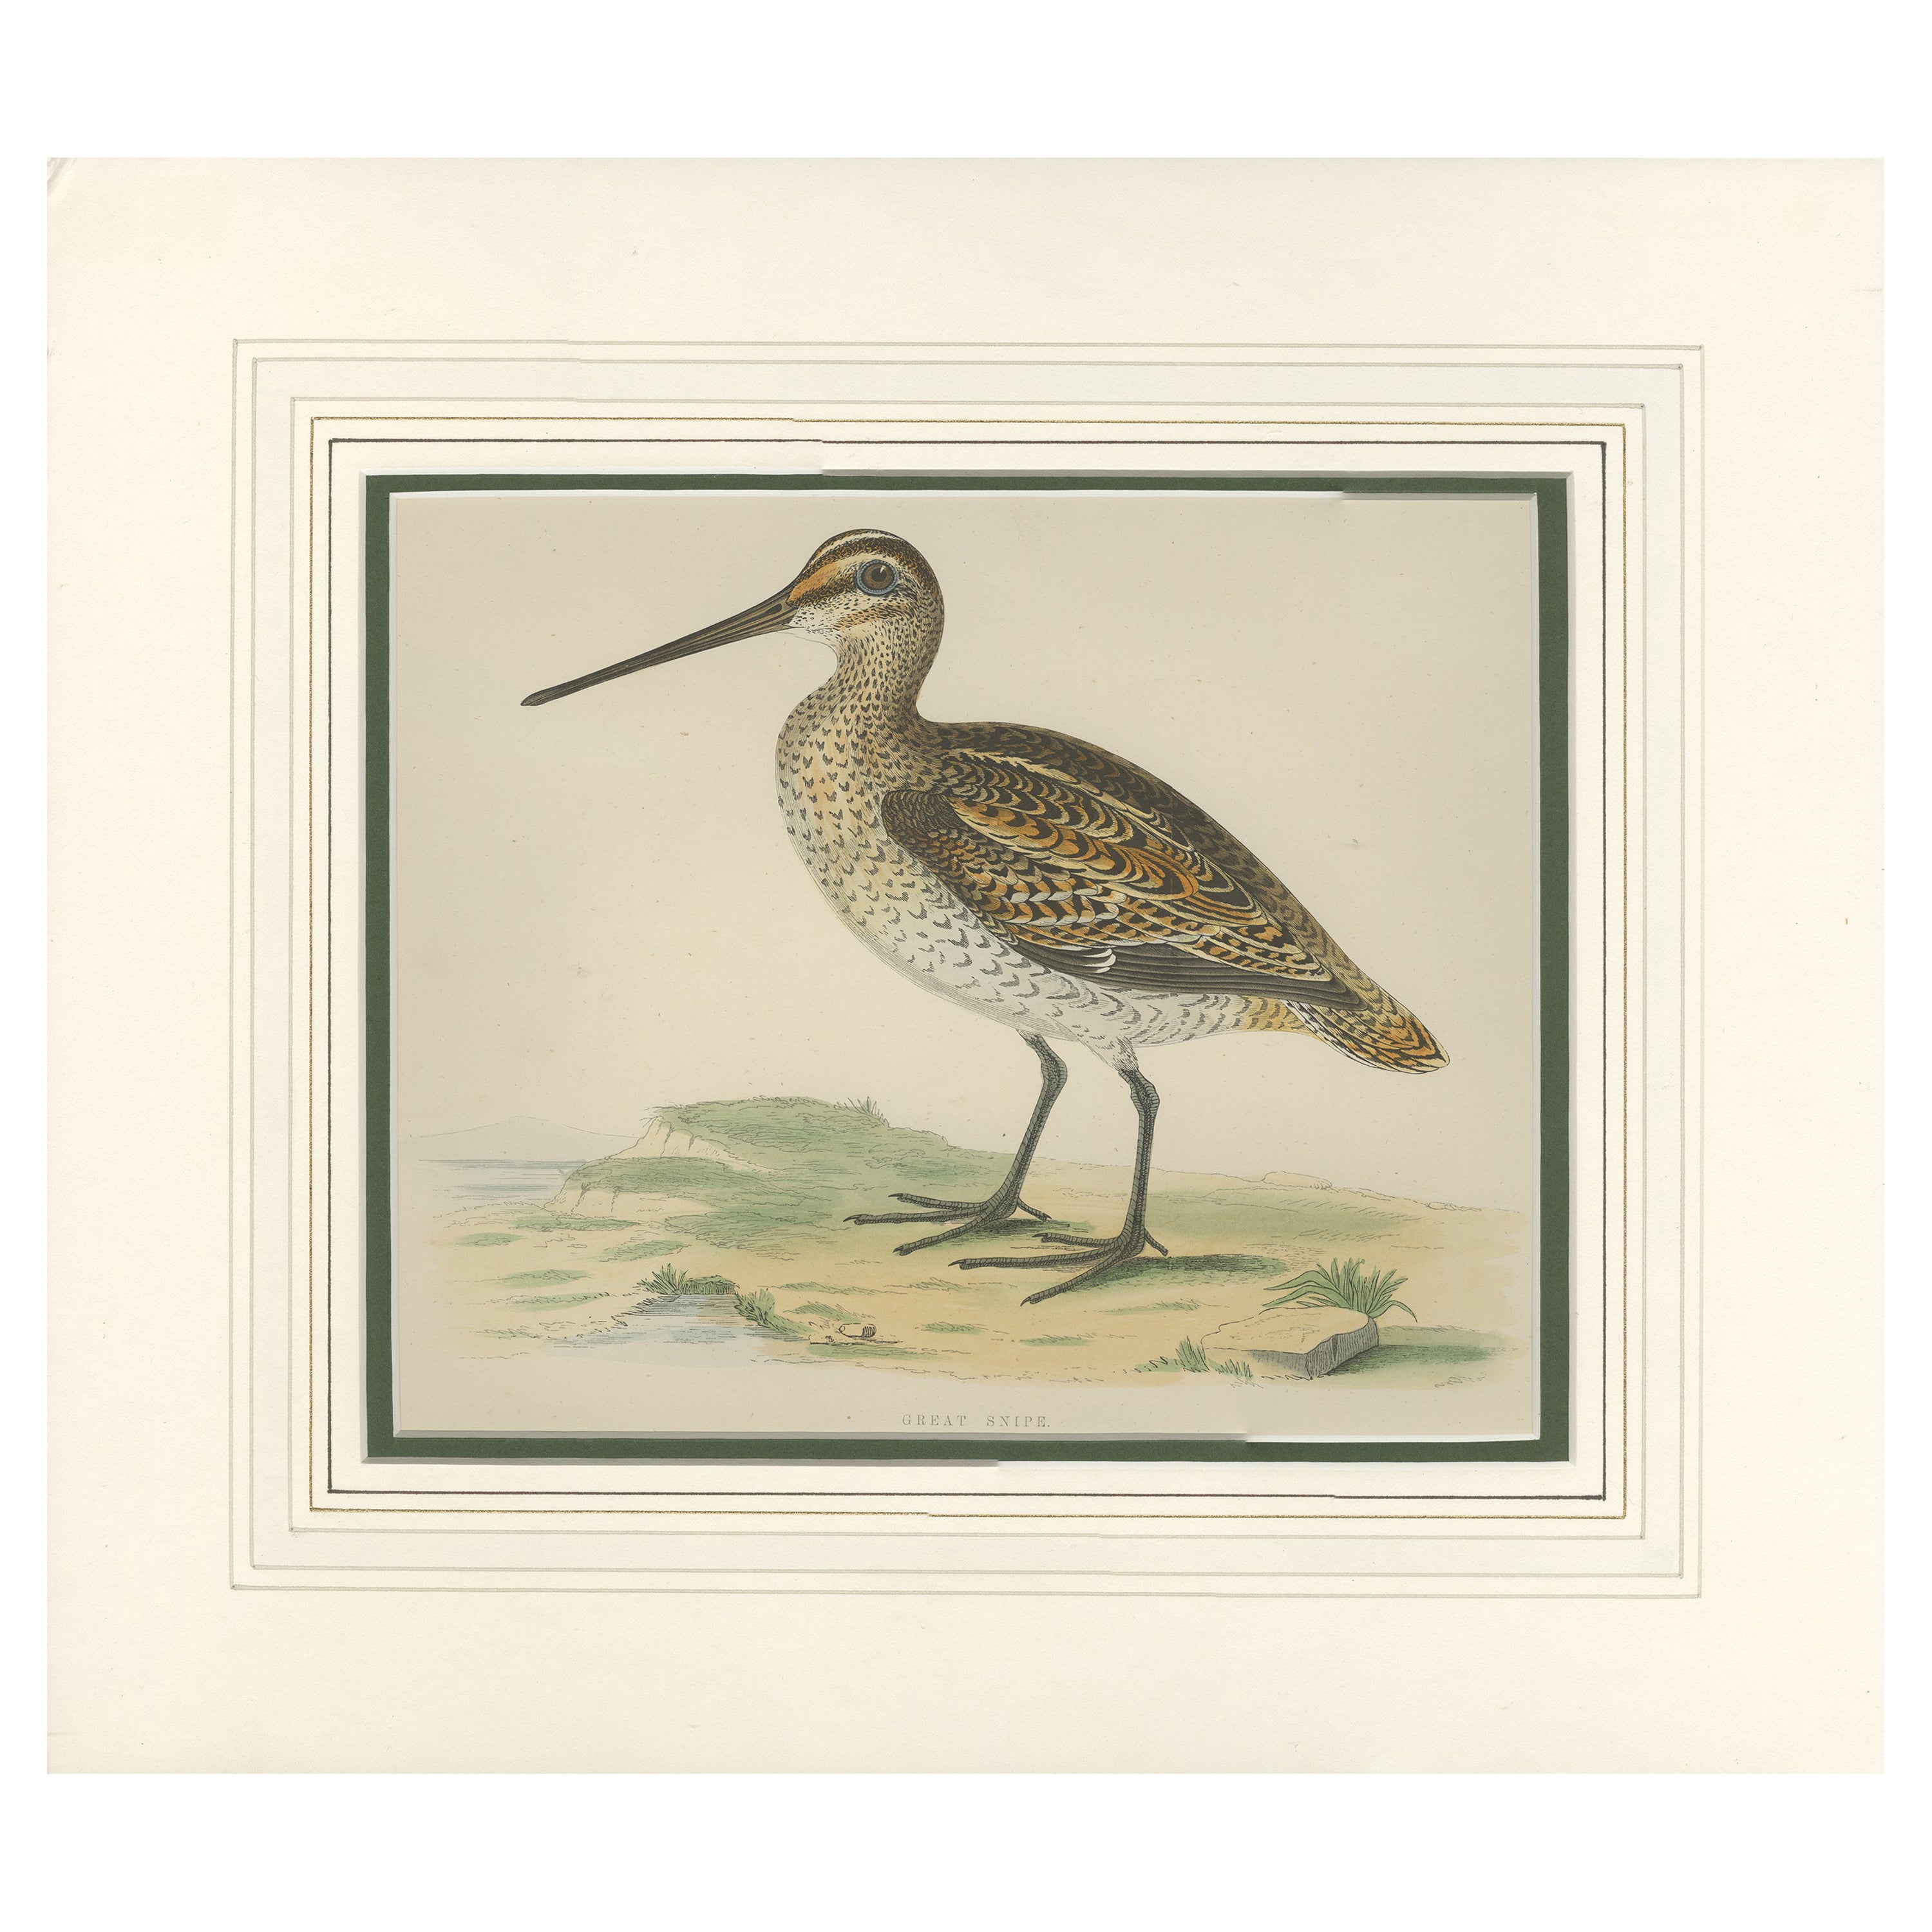 Antique Bird Print of the Great Snipe by Morris '1855' For Sale